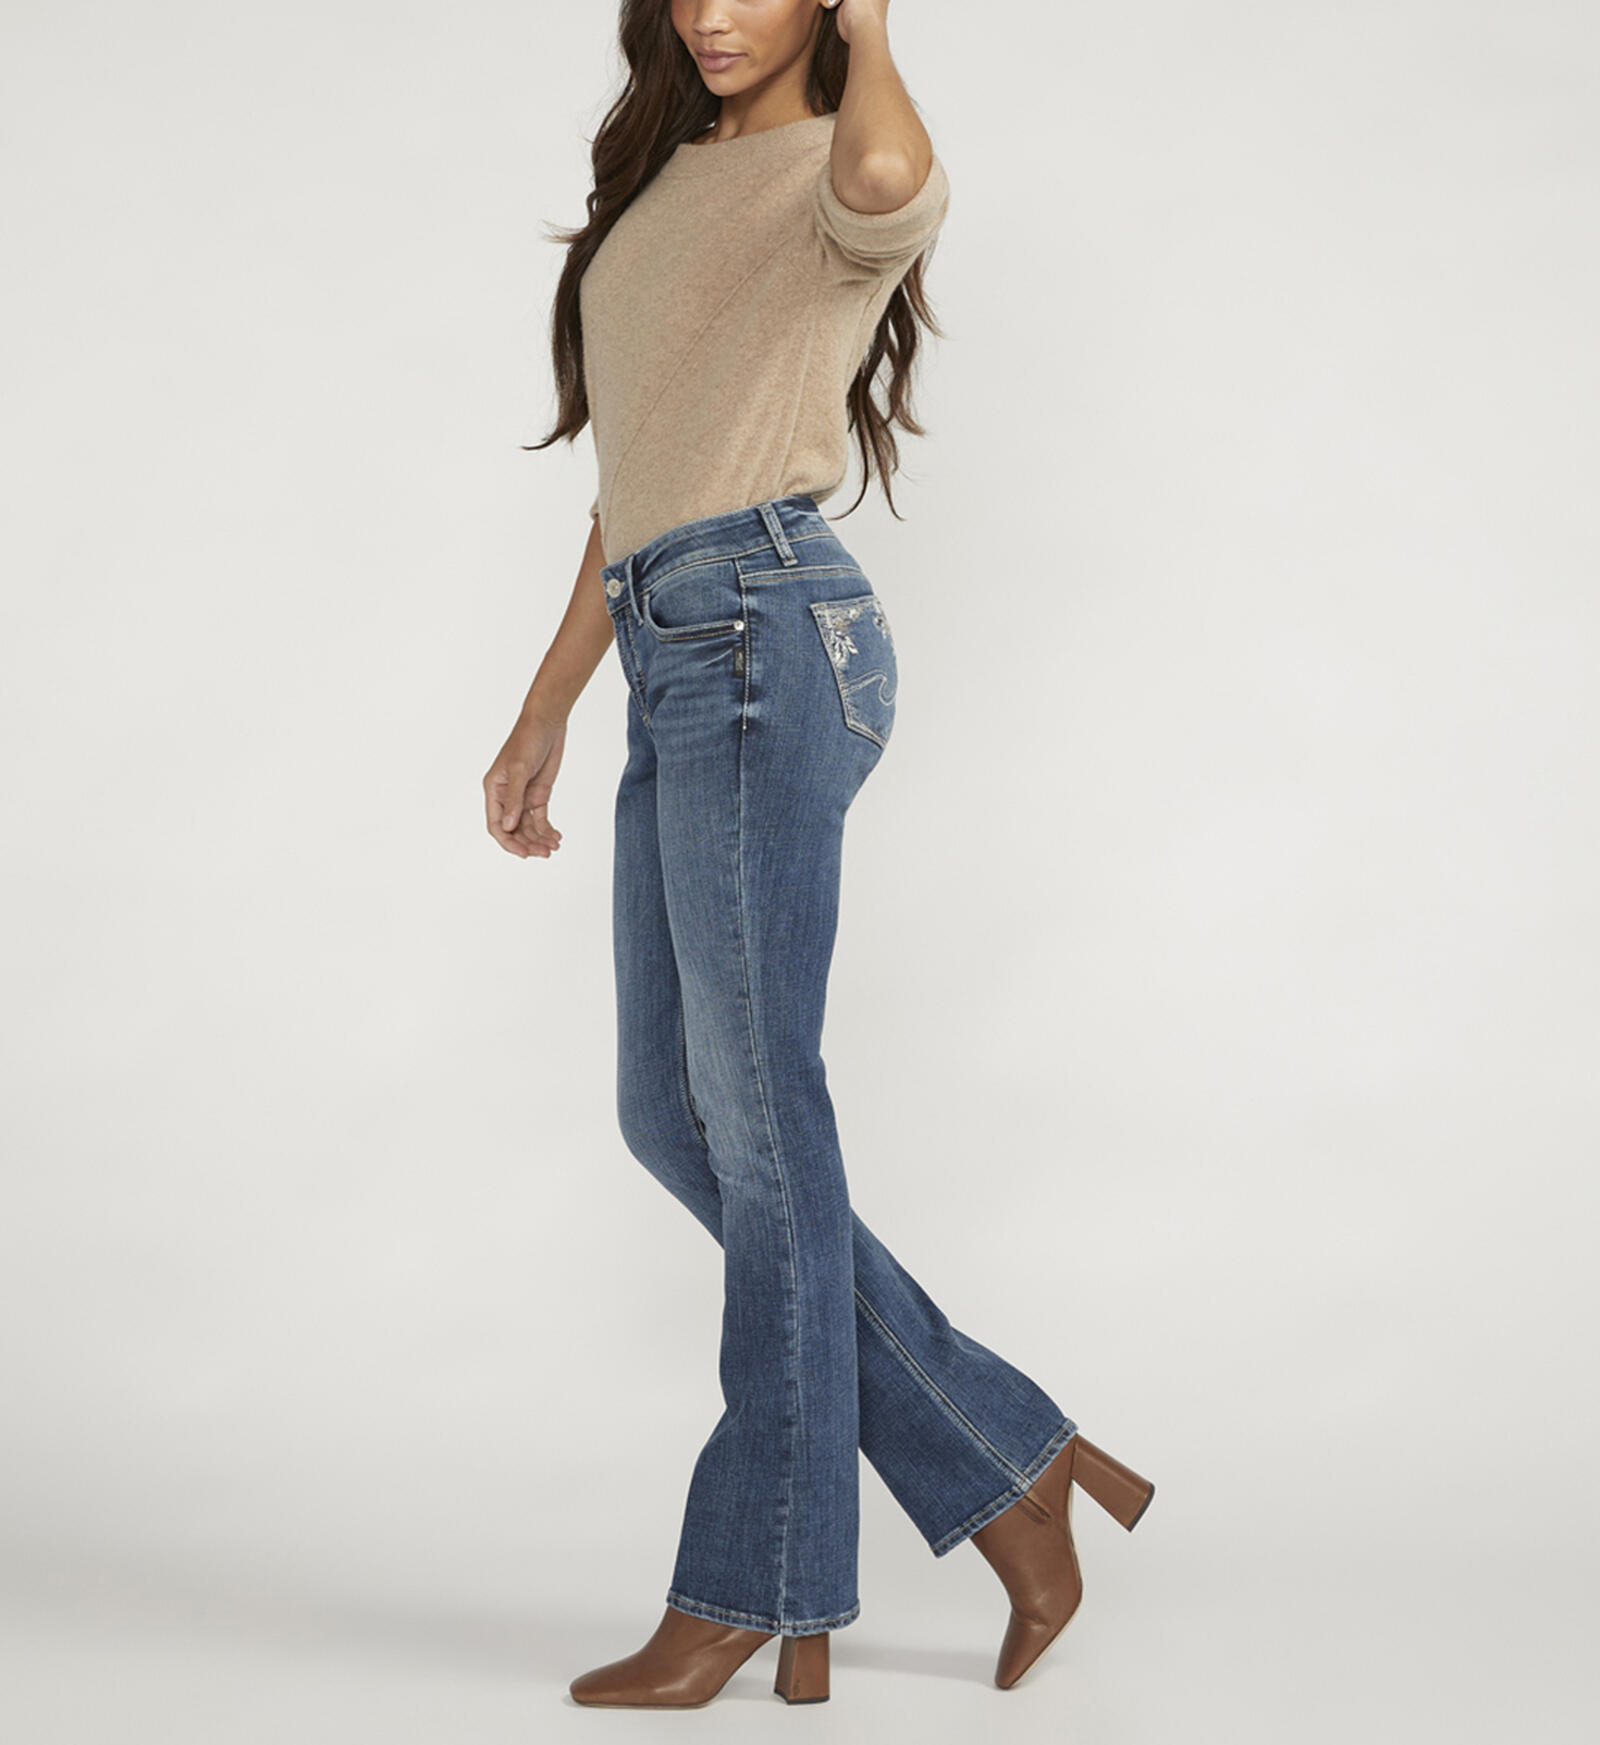 Buy Elyse Mid Rise Bootcut Jeans for USD 94.00